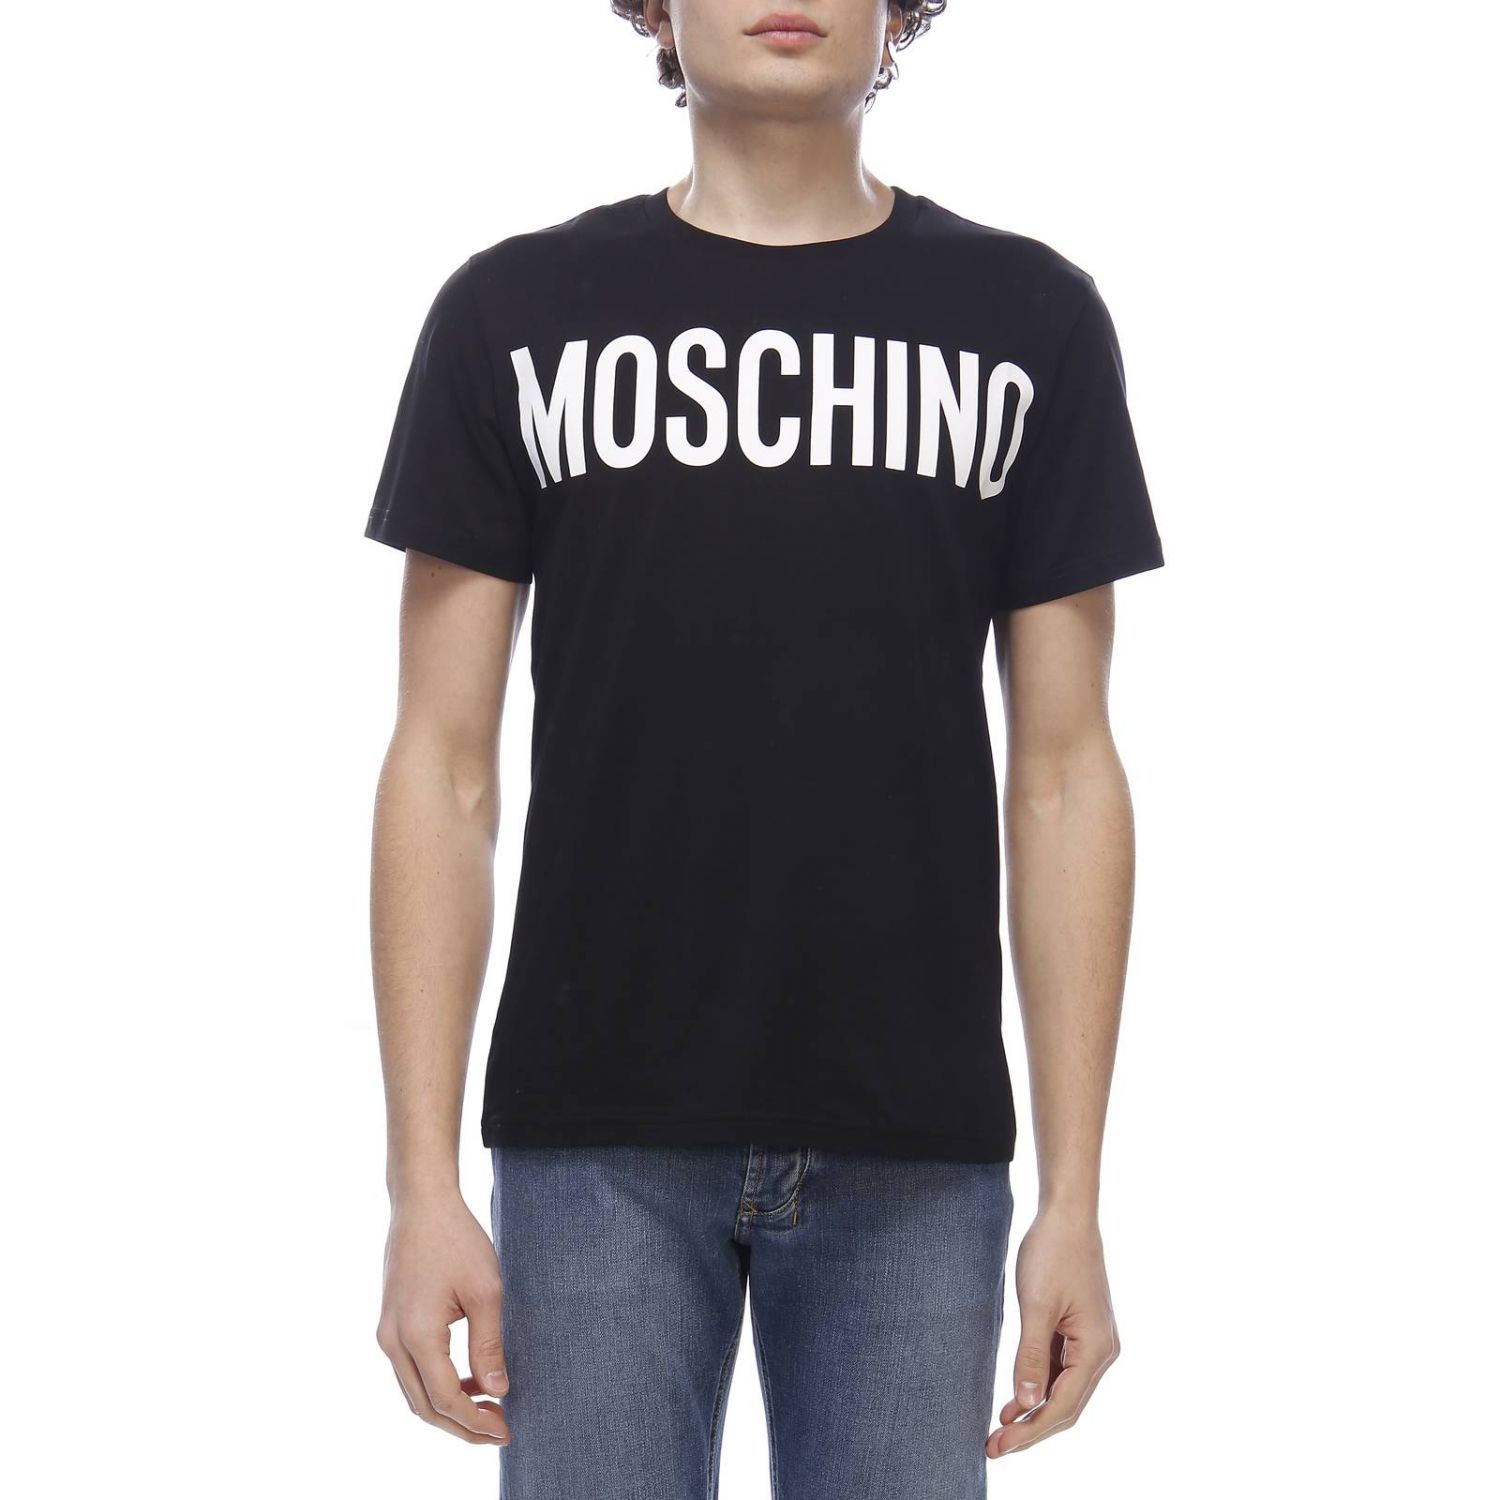 Moschino Couture Outlet: T-shirt men - Black | T-Shirt Moschino Couture ...